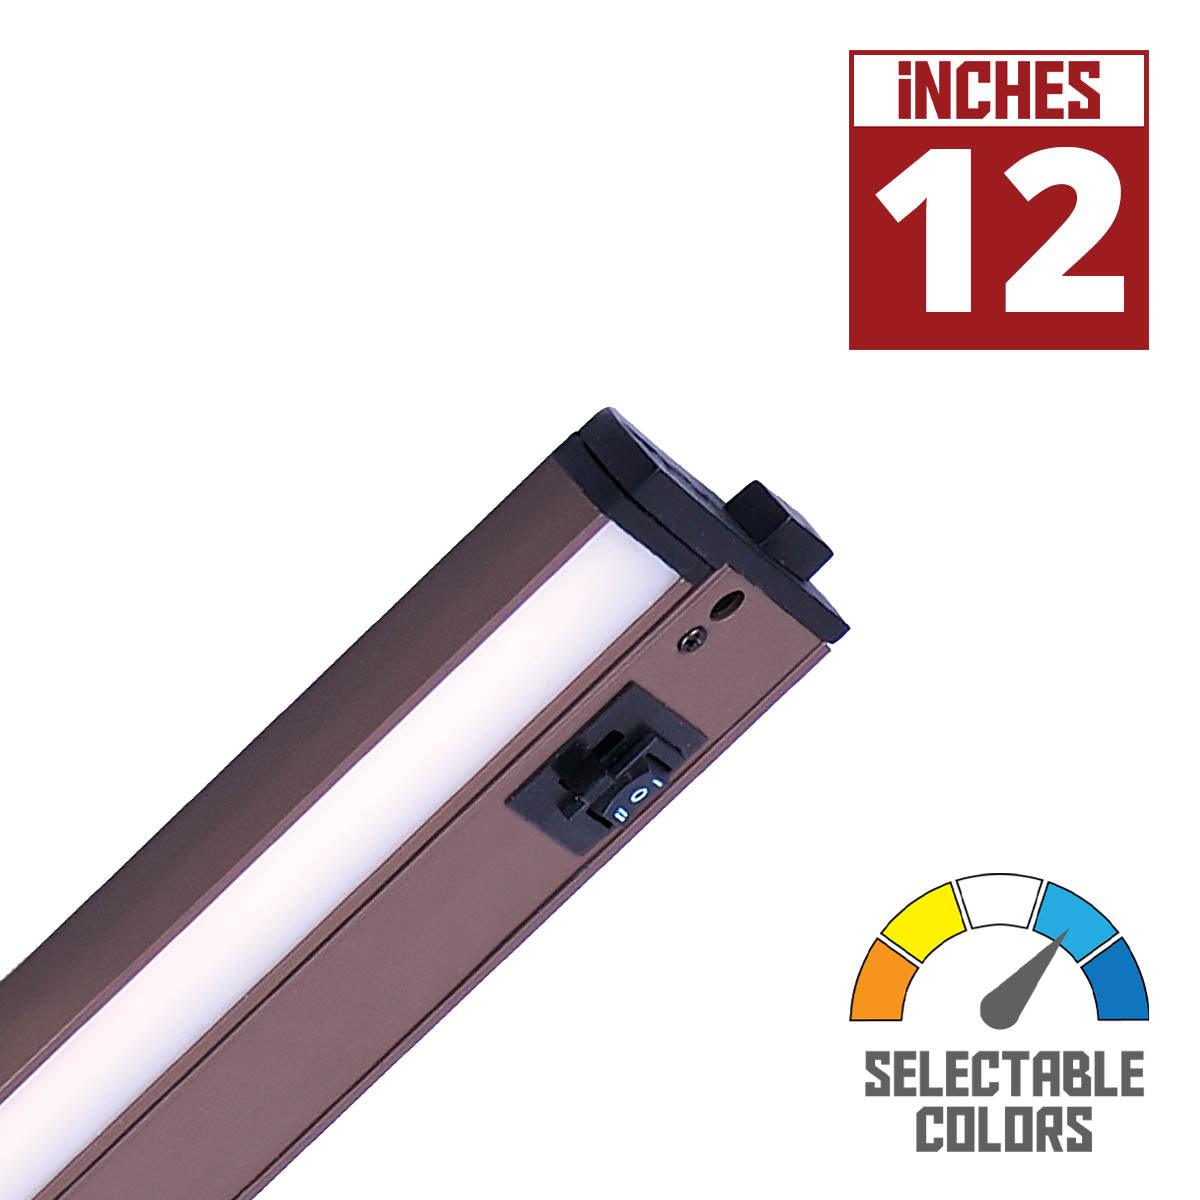 CounterMax 5K 12 Inch Under Cabinet LED Light with Patent gimbals, 720 Lumens, Linkable, CCT Selectable 2700K to 5000K, 120V - Bees Lighting